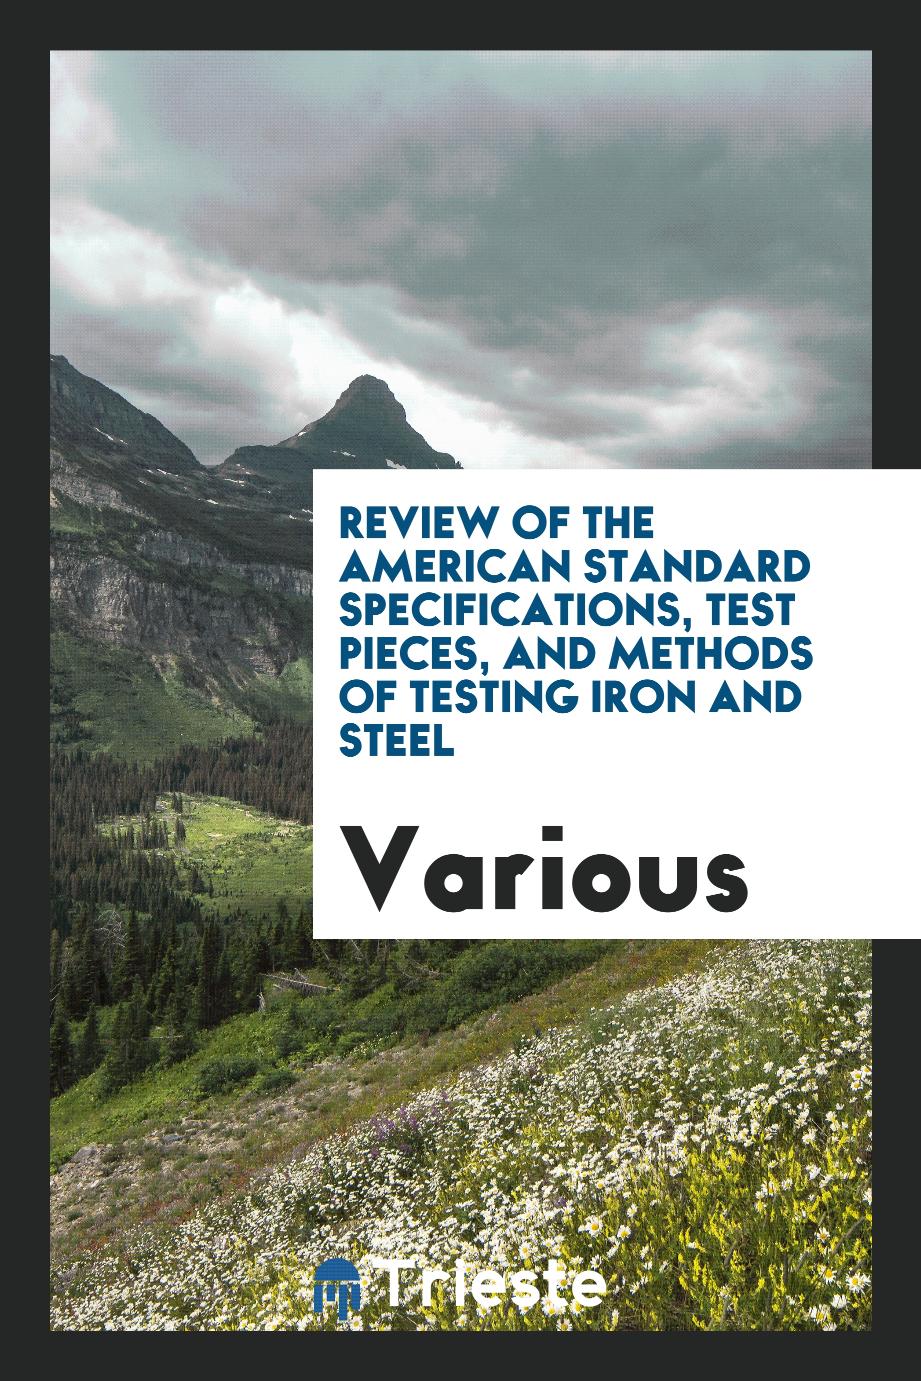 Review of the American Standard Specifications, Test Pieces, and Methods of Testing Iron and Steel